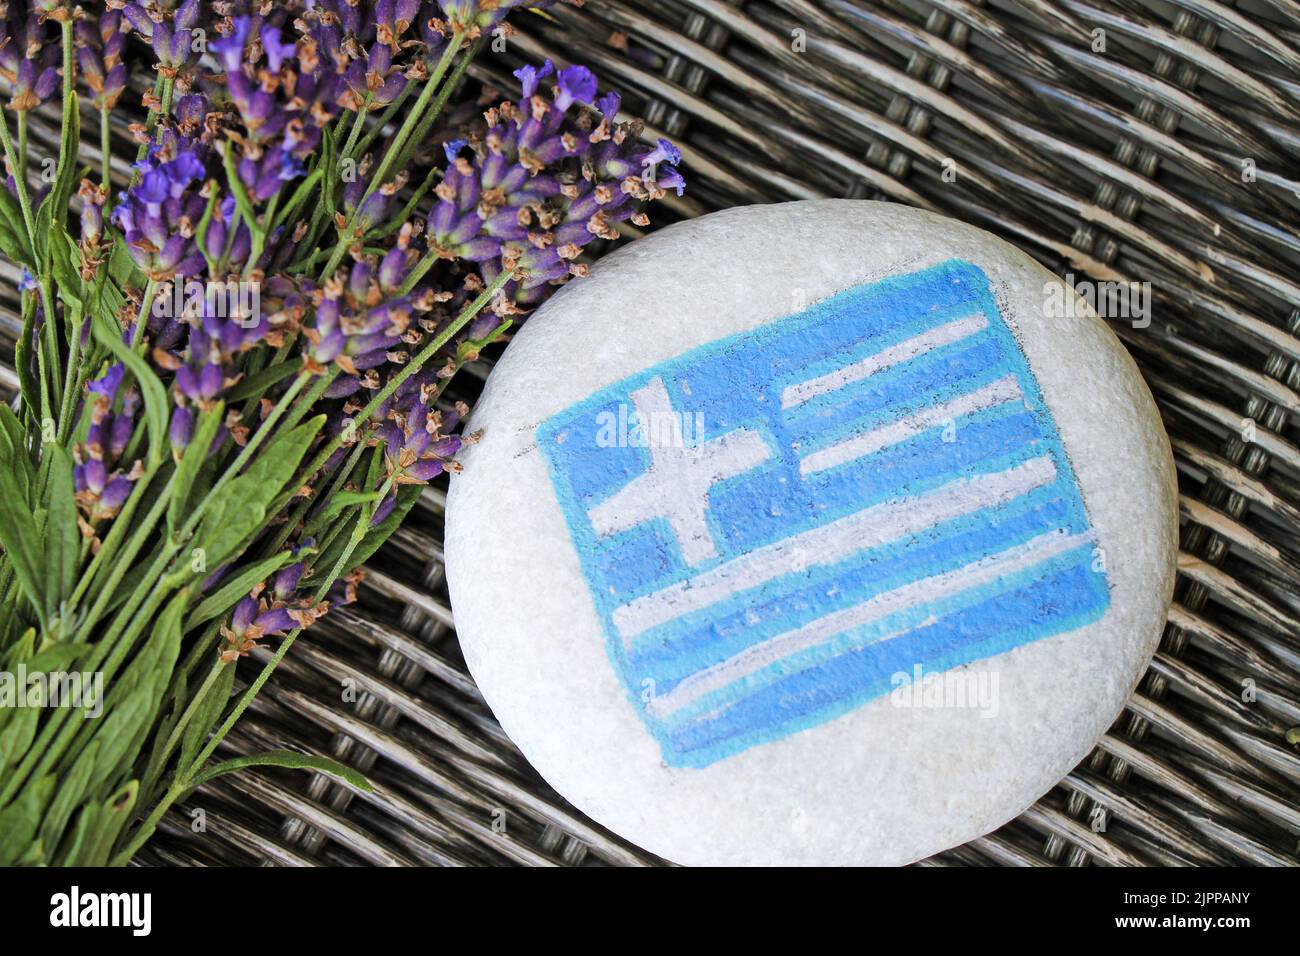 Greece country flag painted on the stones with bunch of fresh lavender flowers on wicker desk background. Stock Photo